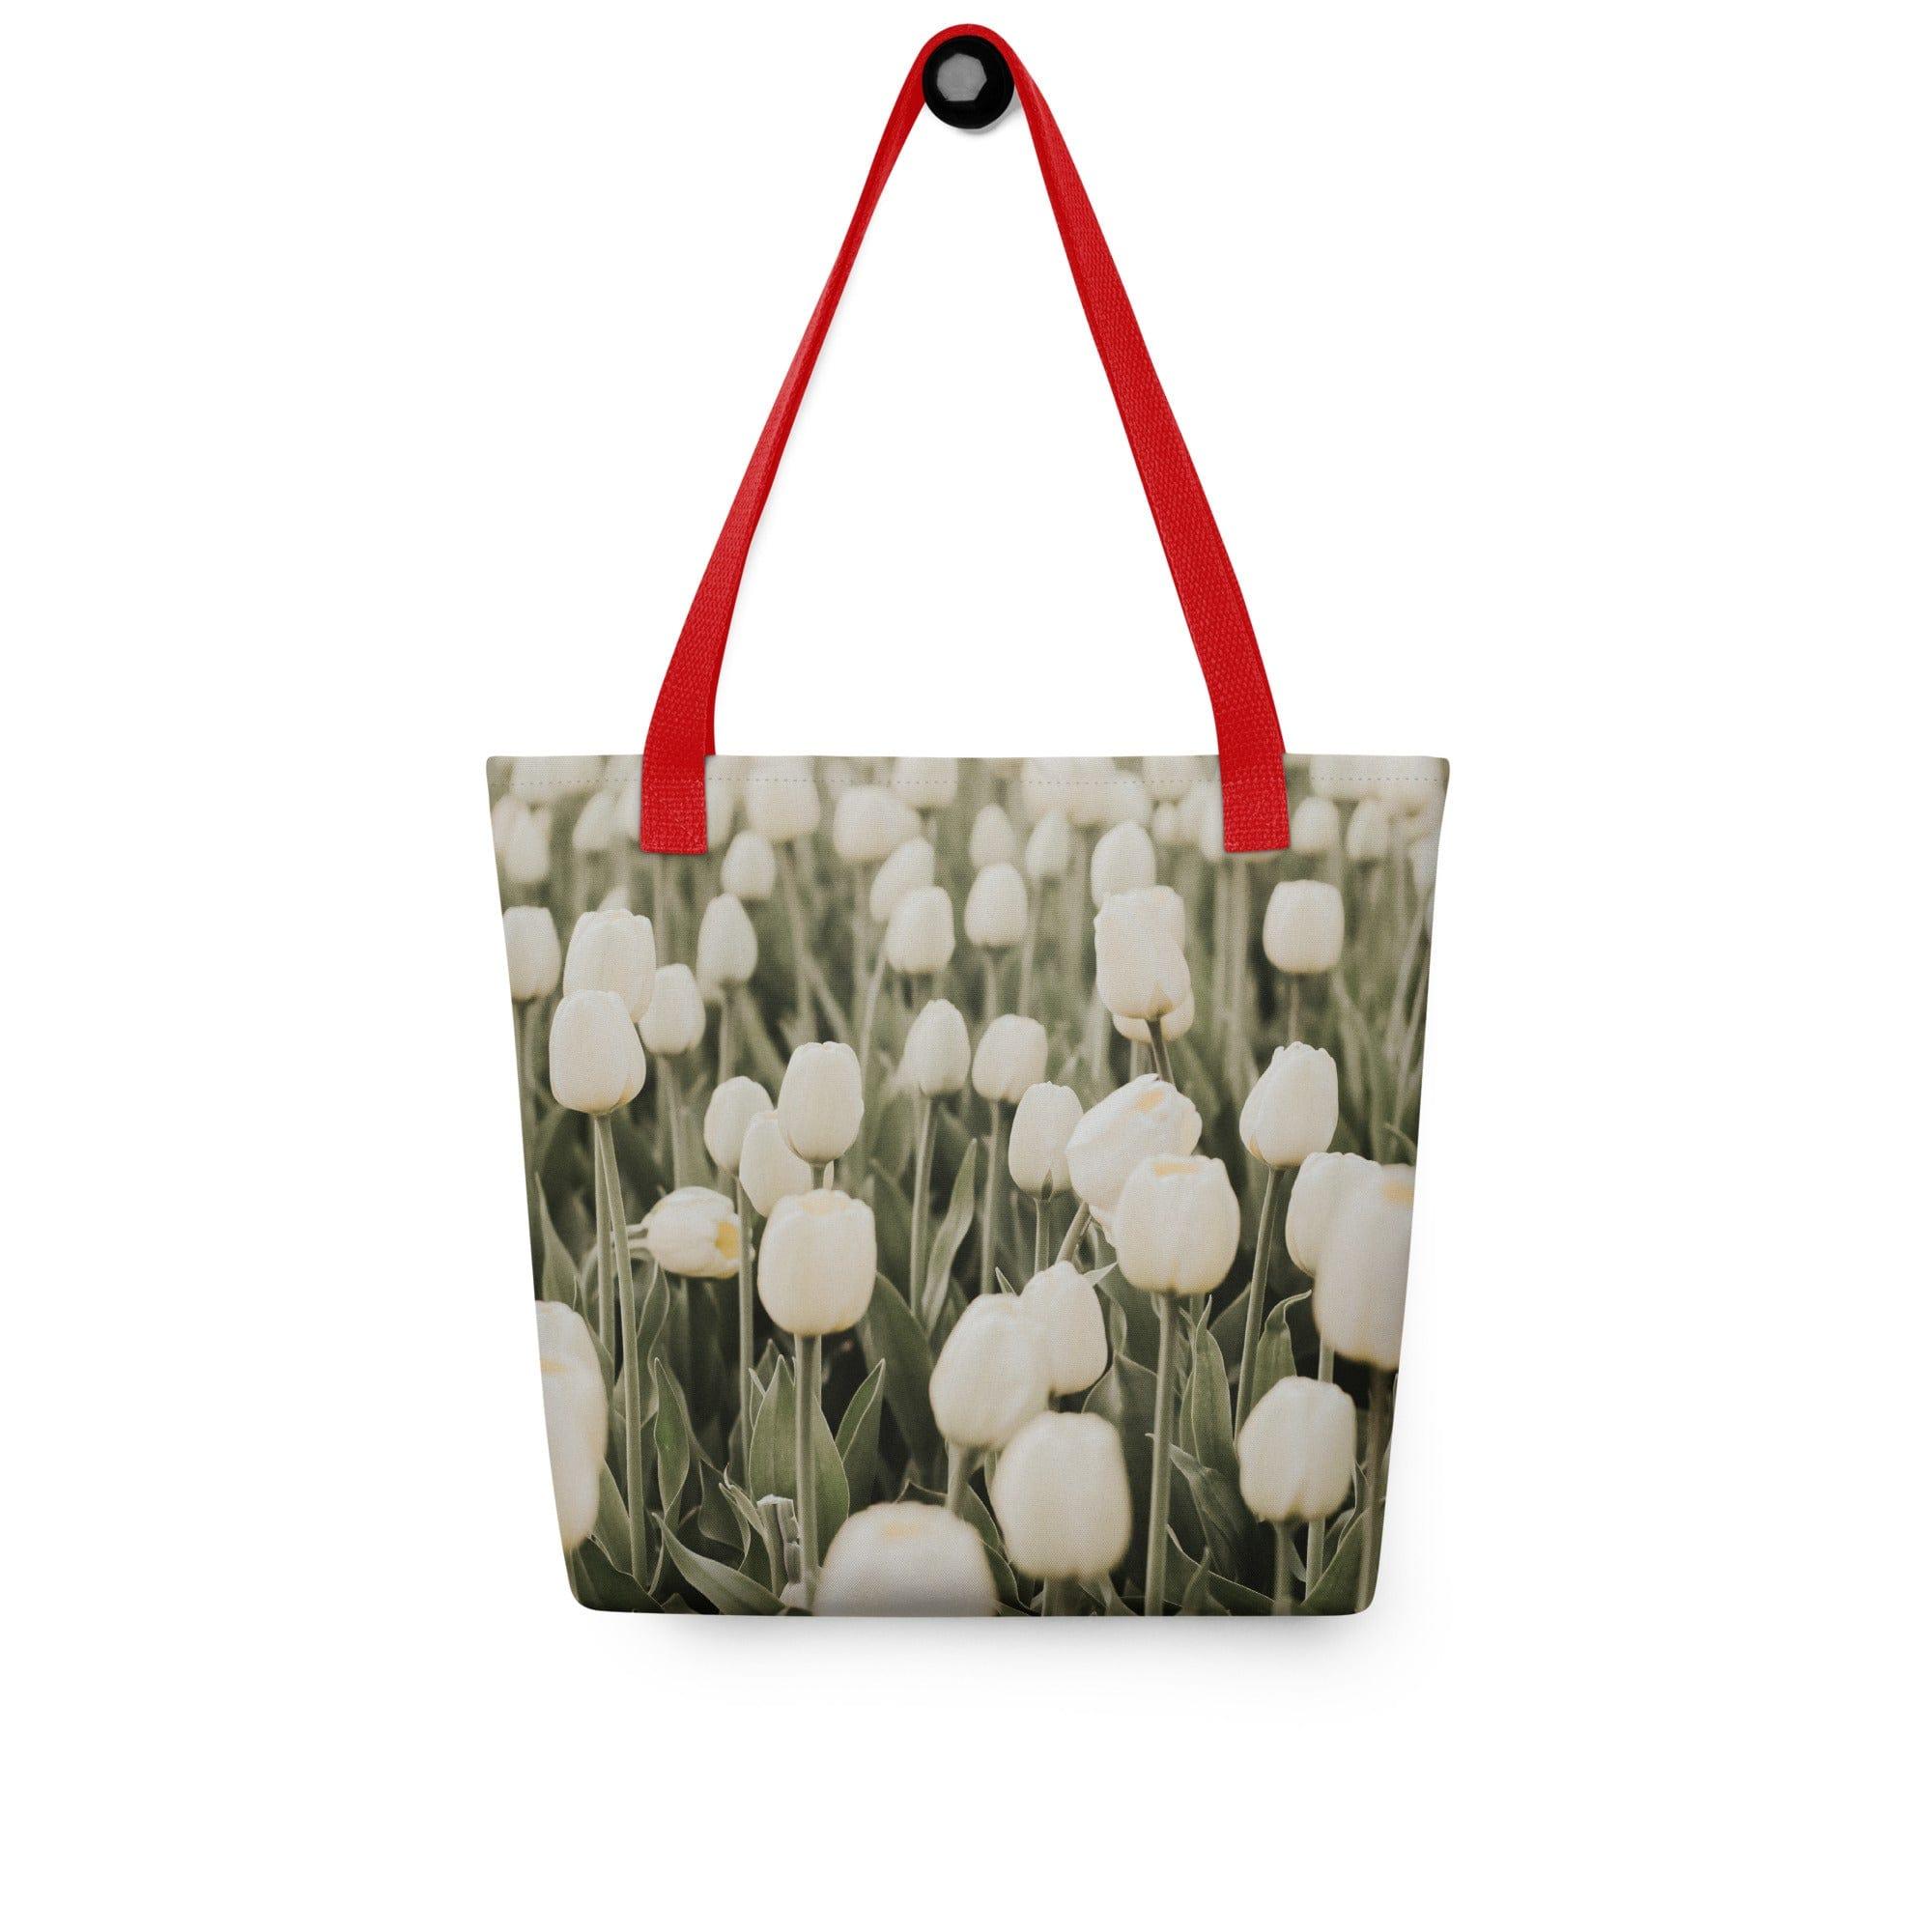 "Field of White Tulip Flowers" Printed Tote Bag by Twin Dollar - Embrace Nature's Beauty in Style! - TWIN DOLLAR